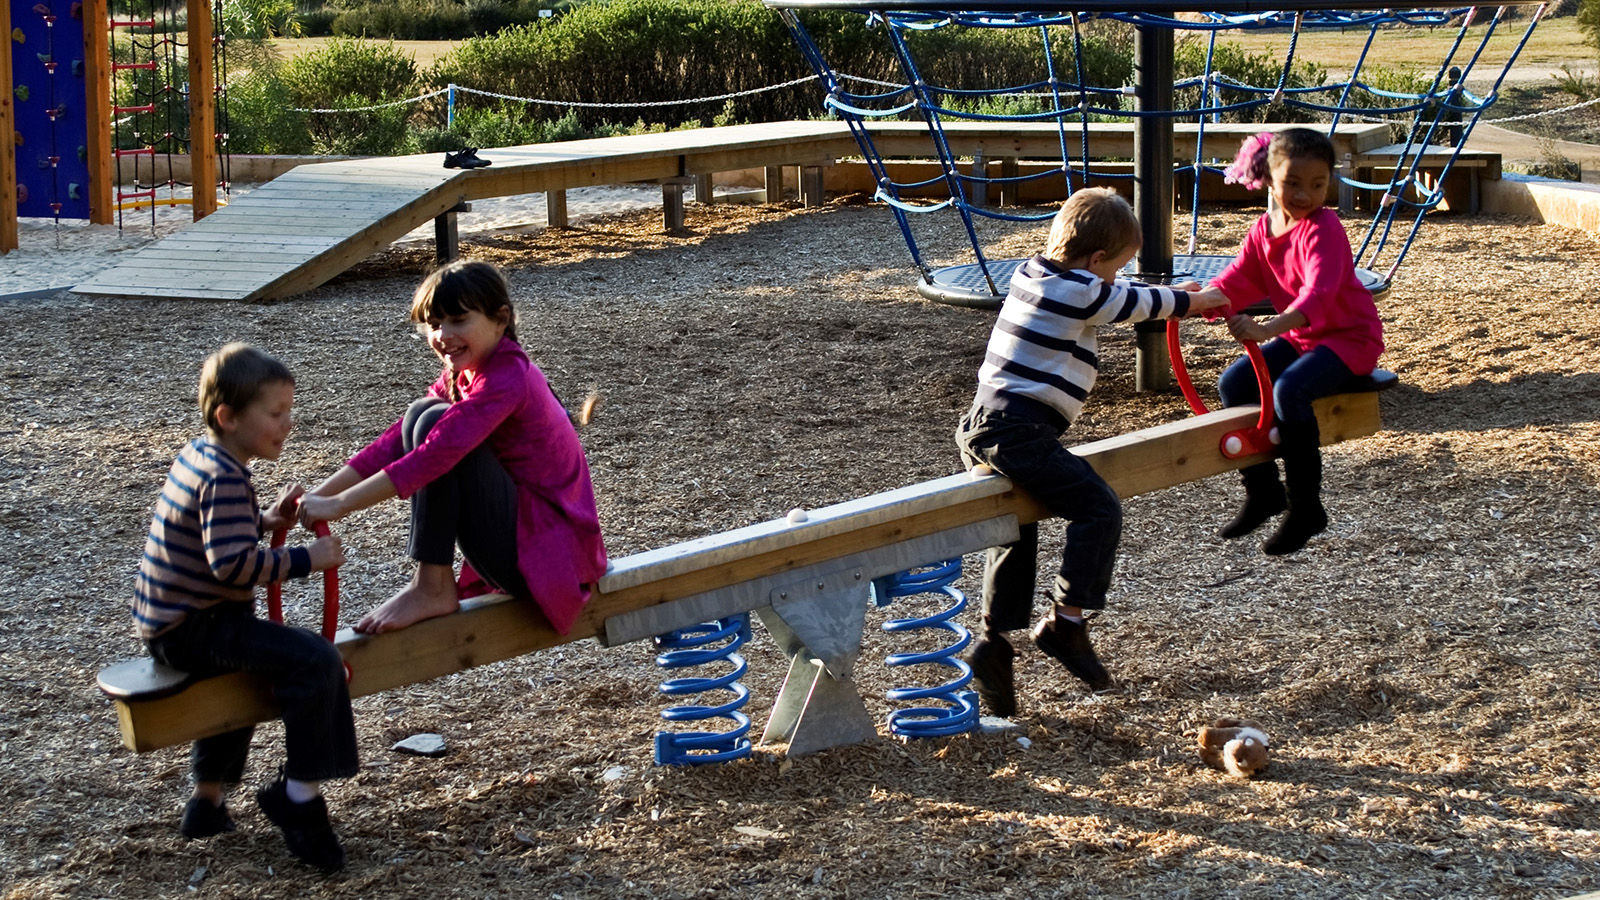 Image four children using seesaw play equipment